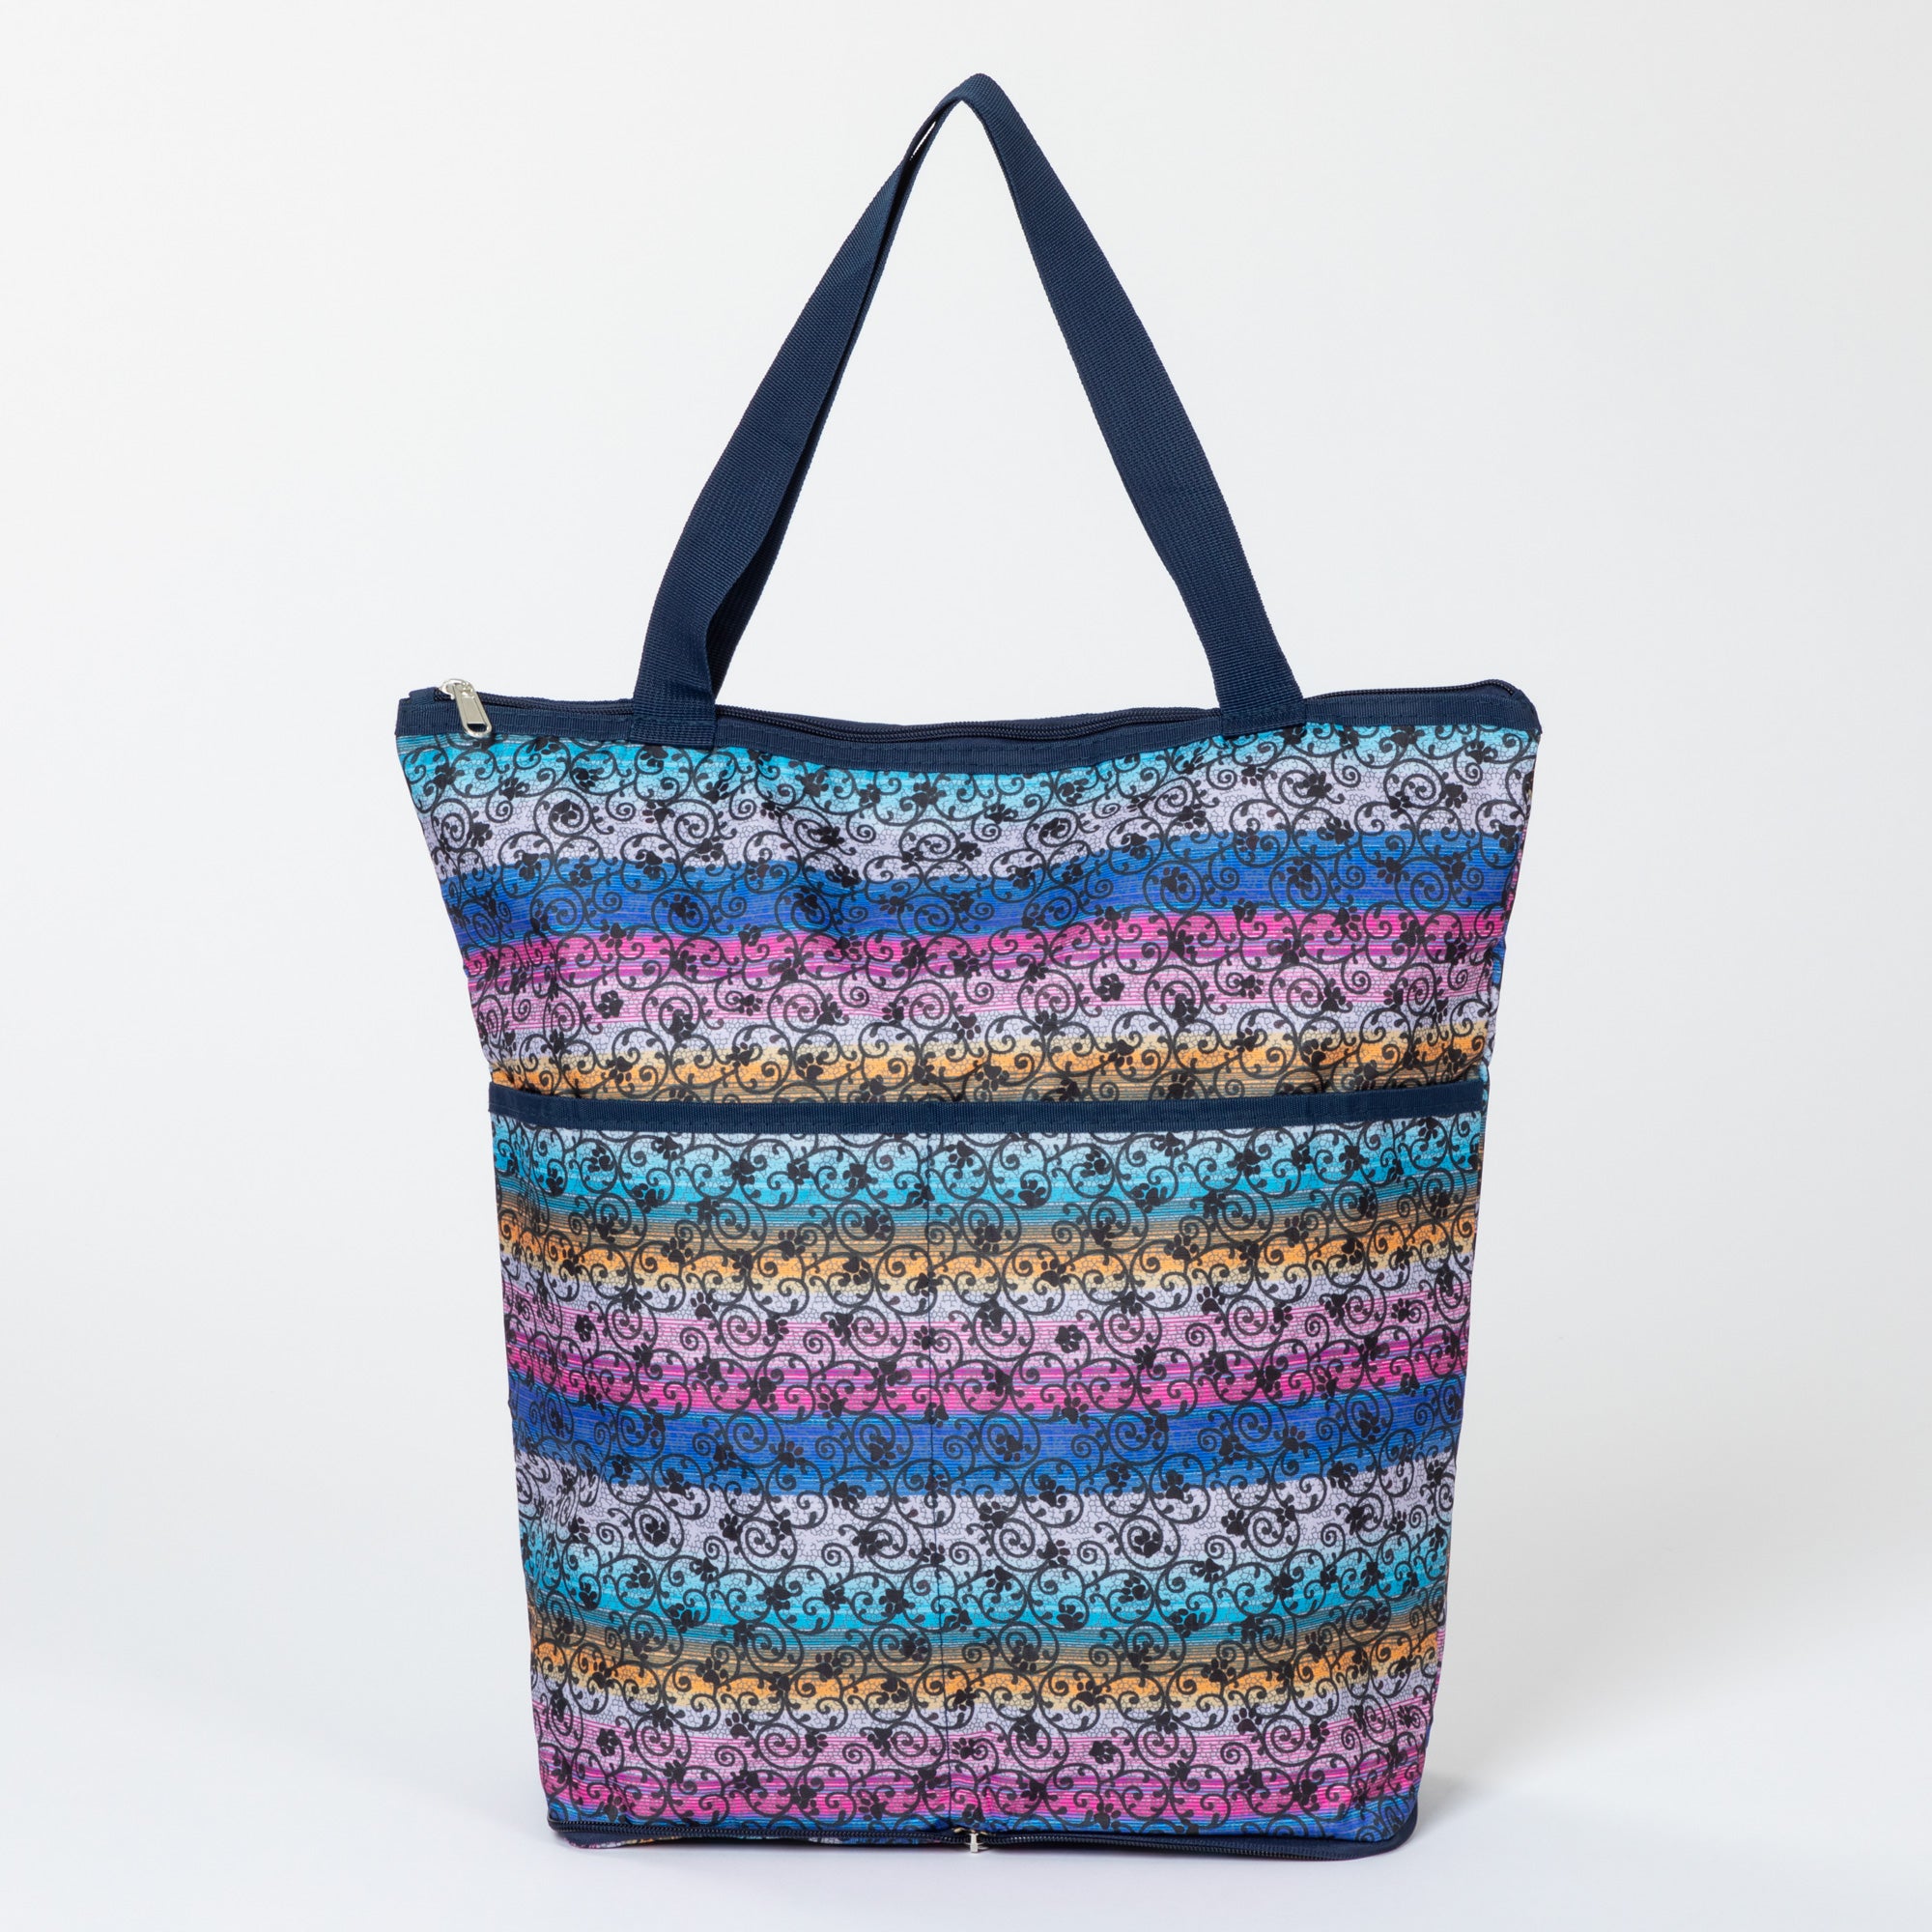 Extra Large Foldable Paw Print Tote Bag - Shadow Vines & Paws